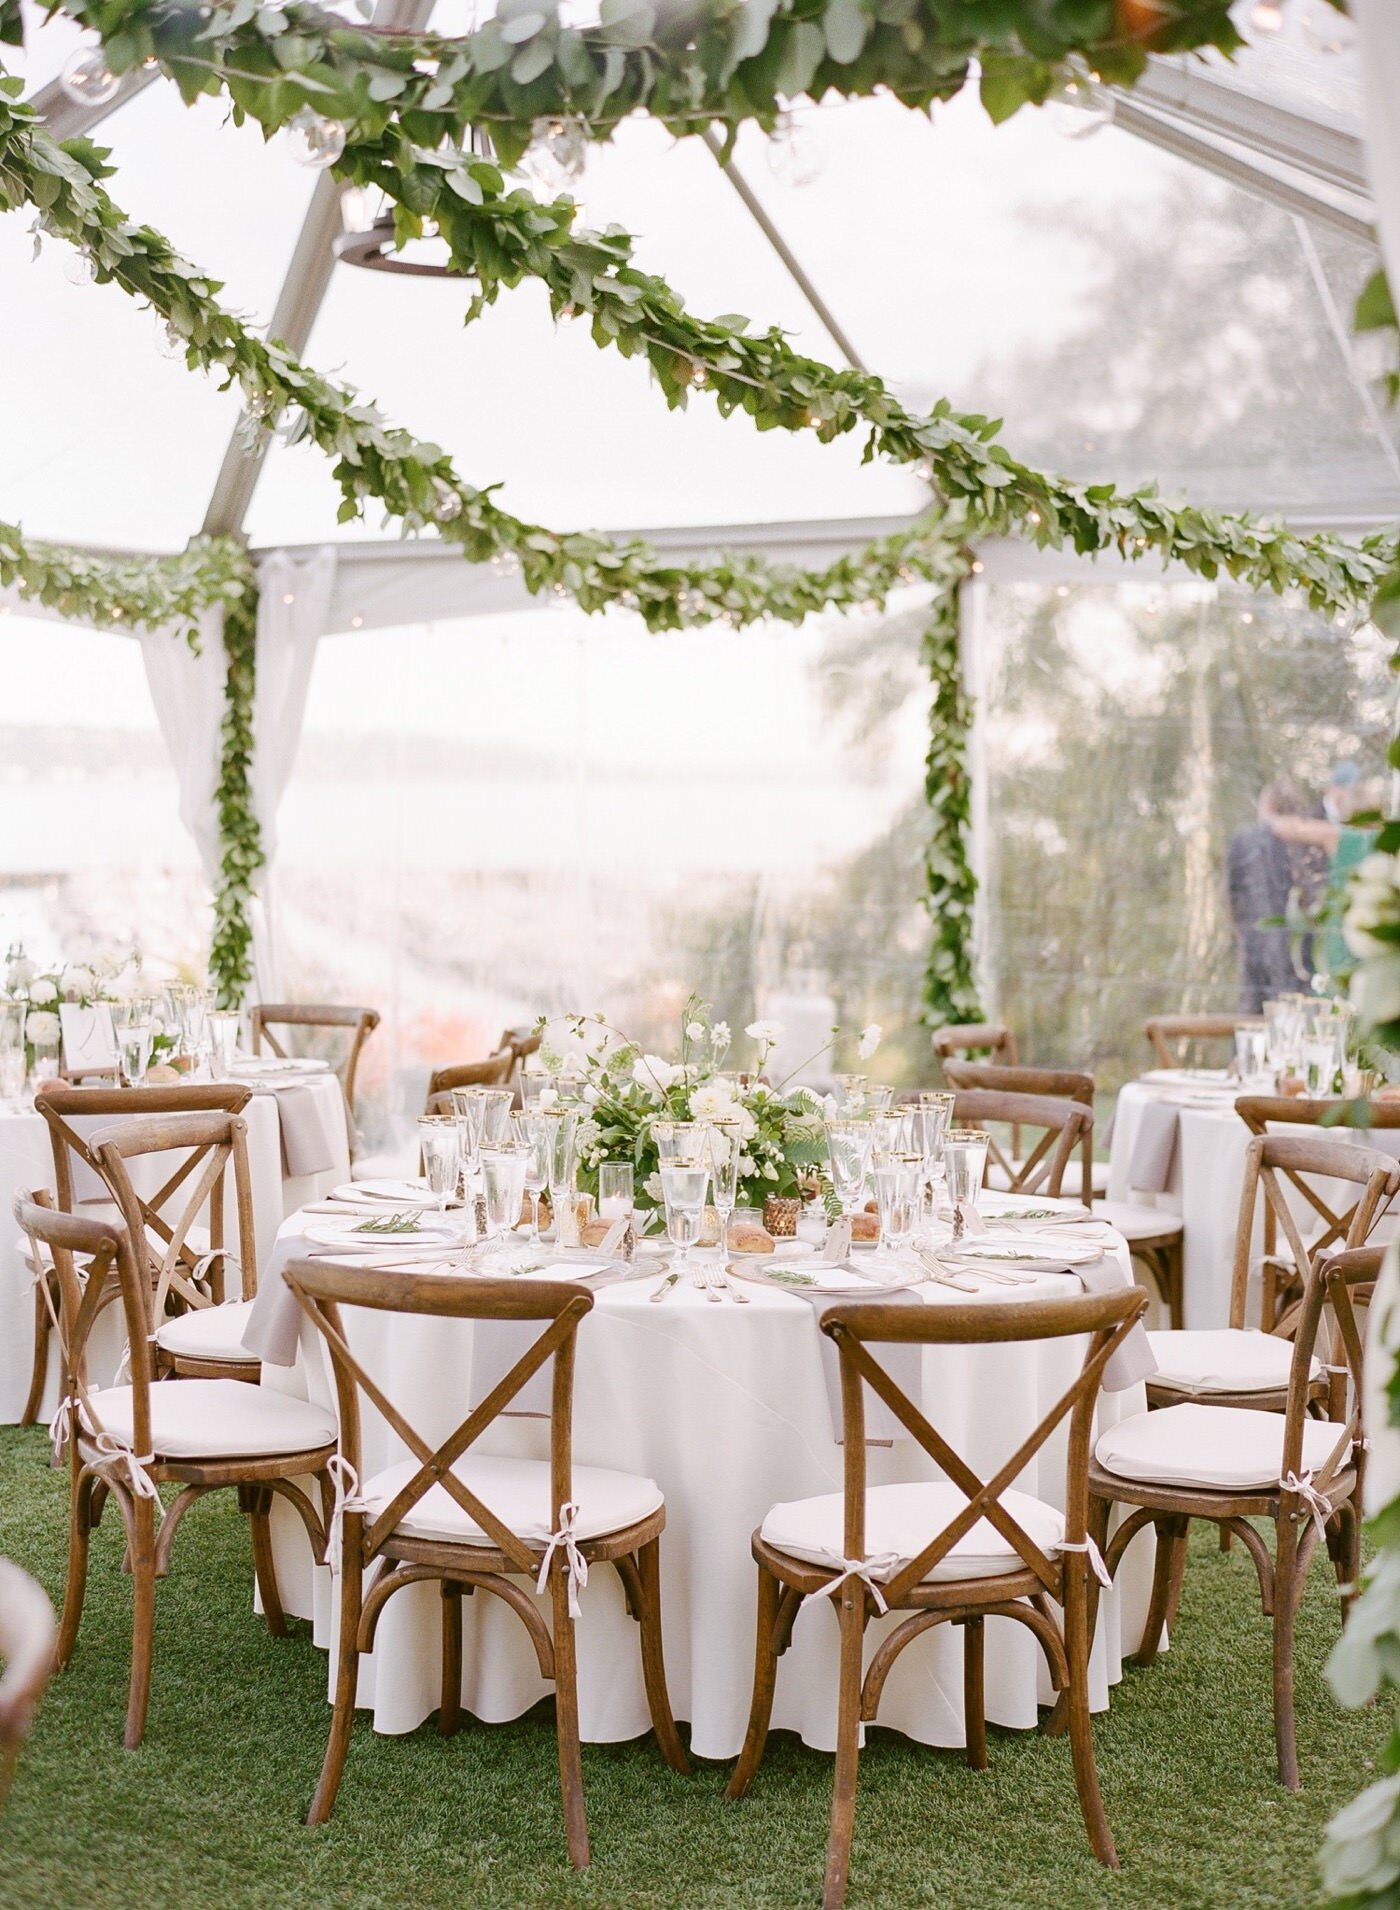 Organic and elegant green and white tented wedding reception at The Admiral's House